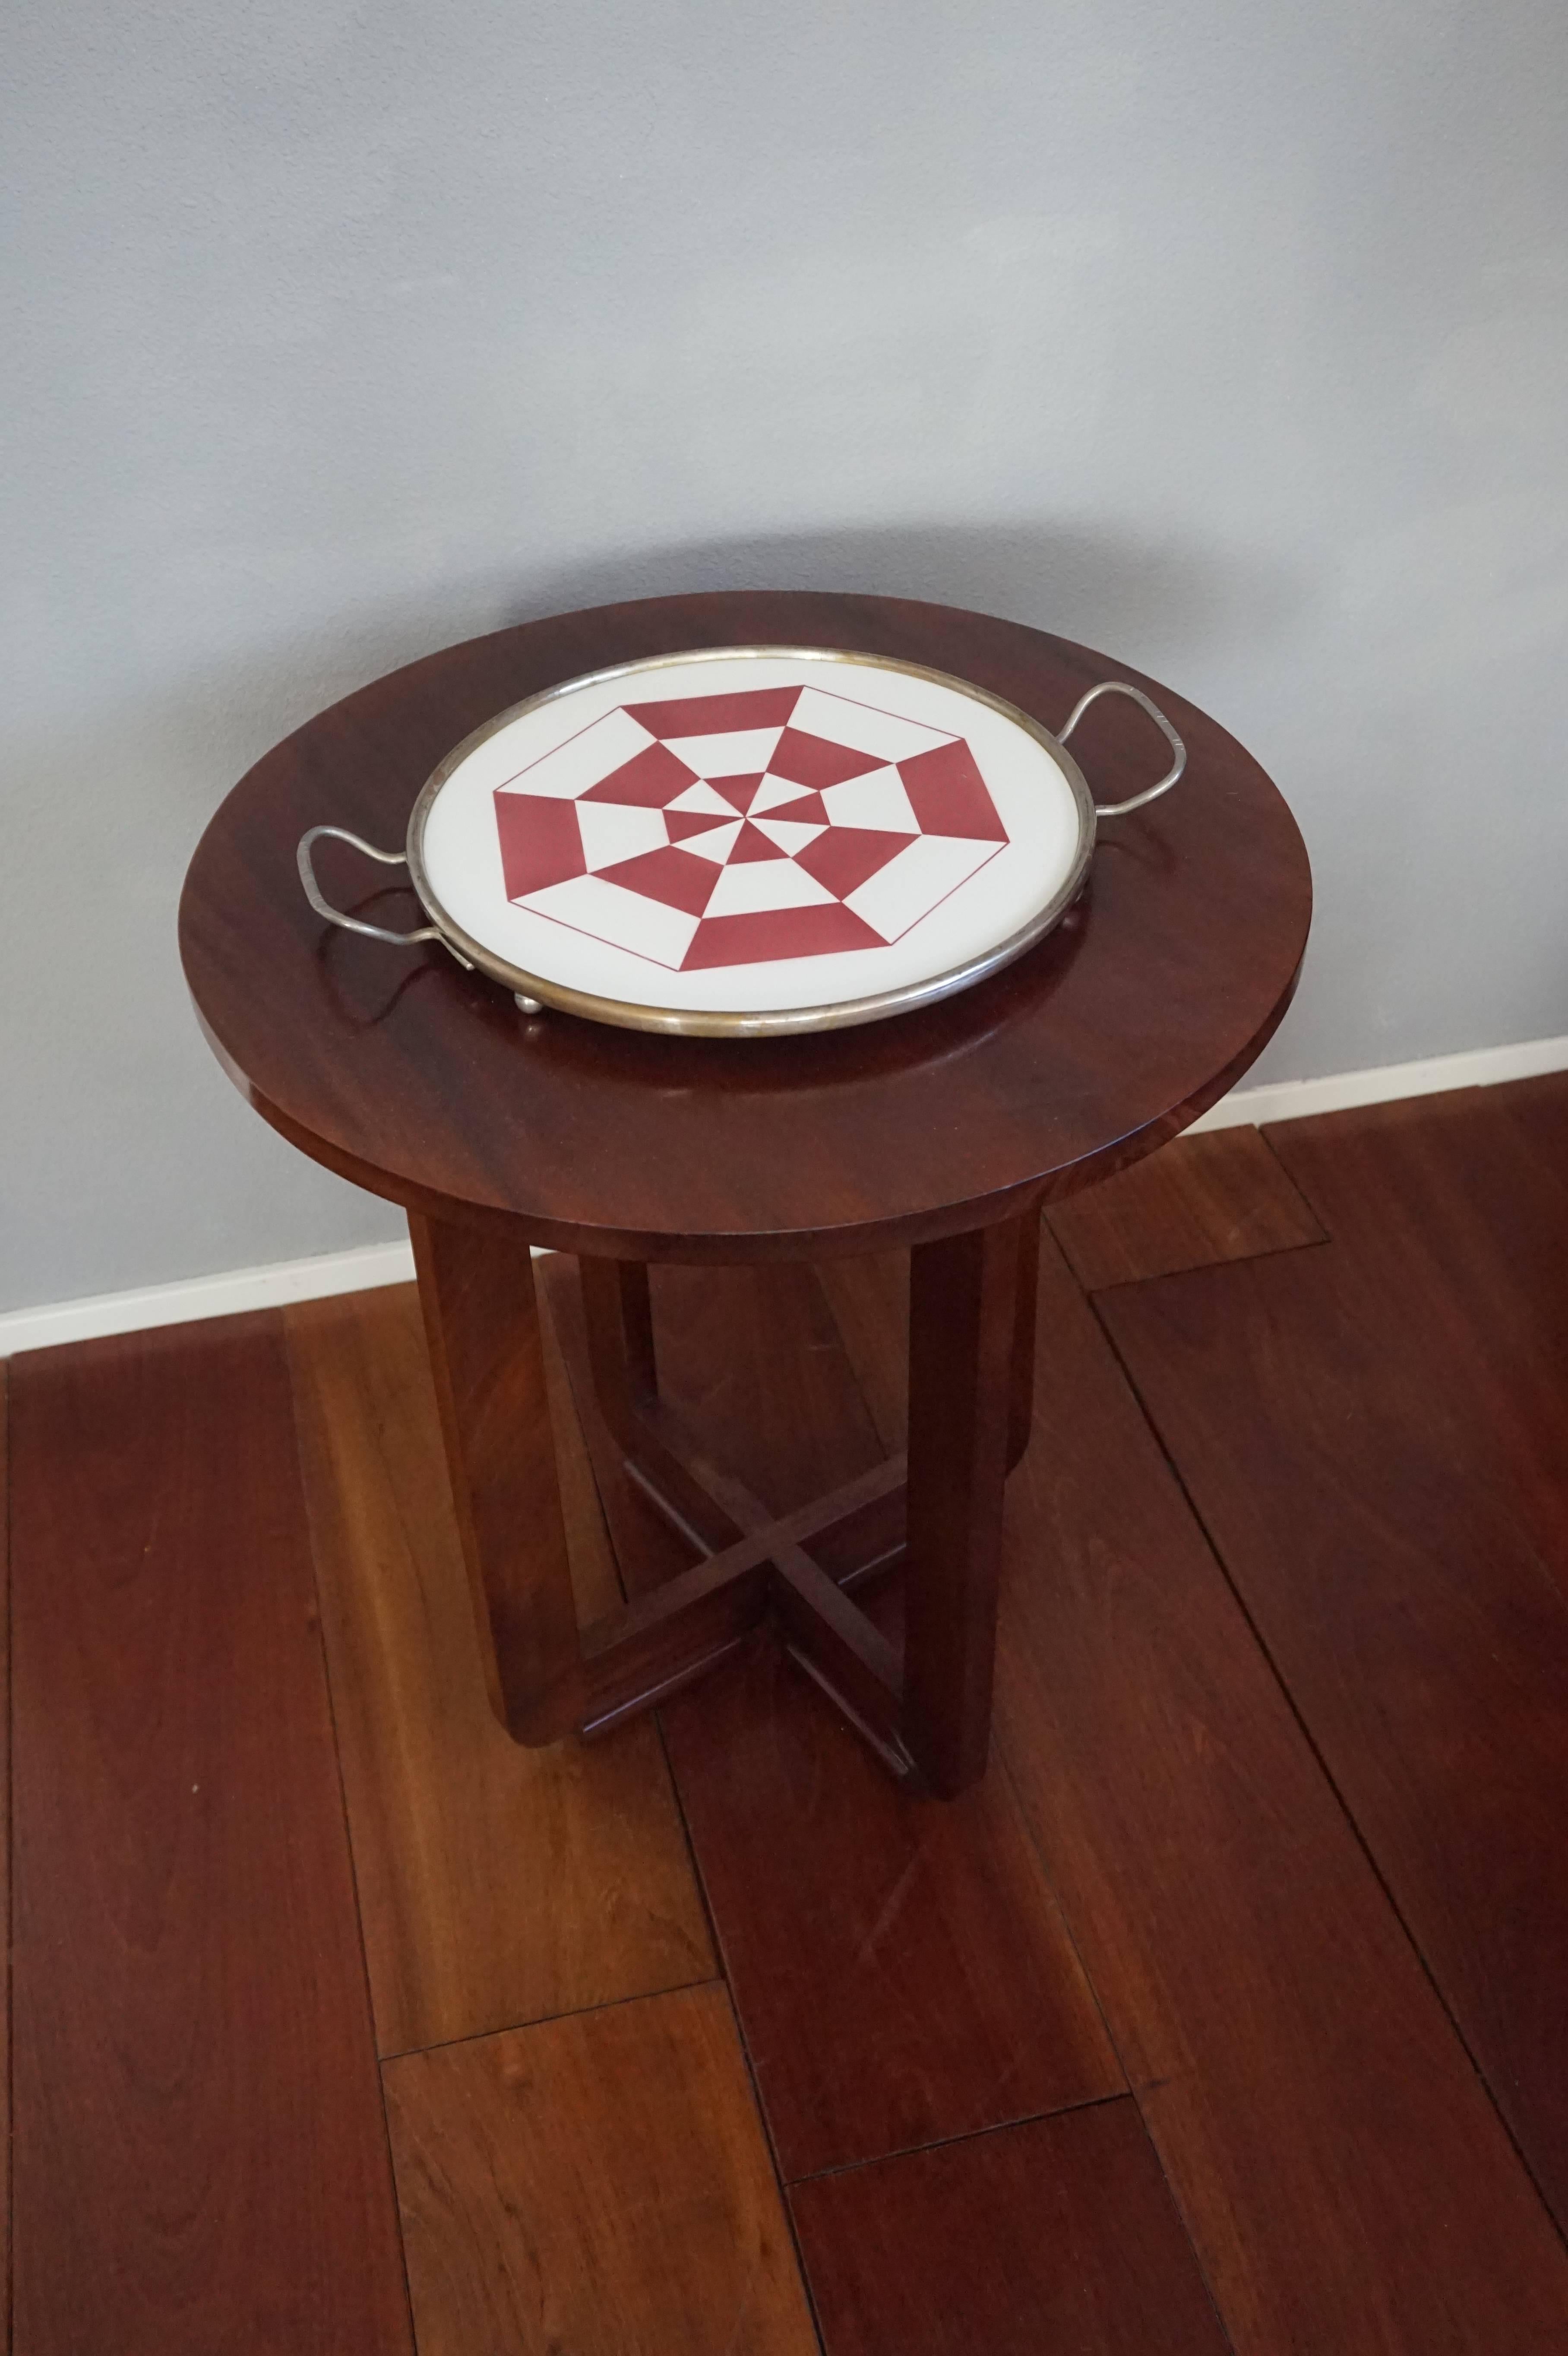 Beautiful and rare Art Deco tray.

This rare Art Deco serving tray with the beautiful, geometrical pattern is in excellent condition. It will look terrific atop a drinks cabinet, dresser, side table etc. This one piece, circular tile is in perfect